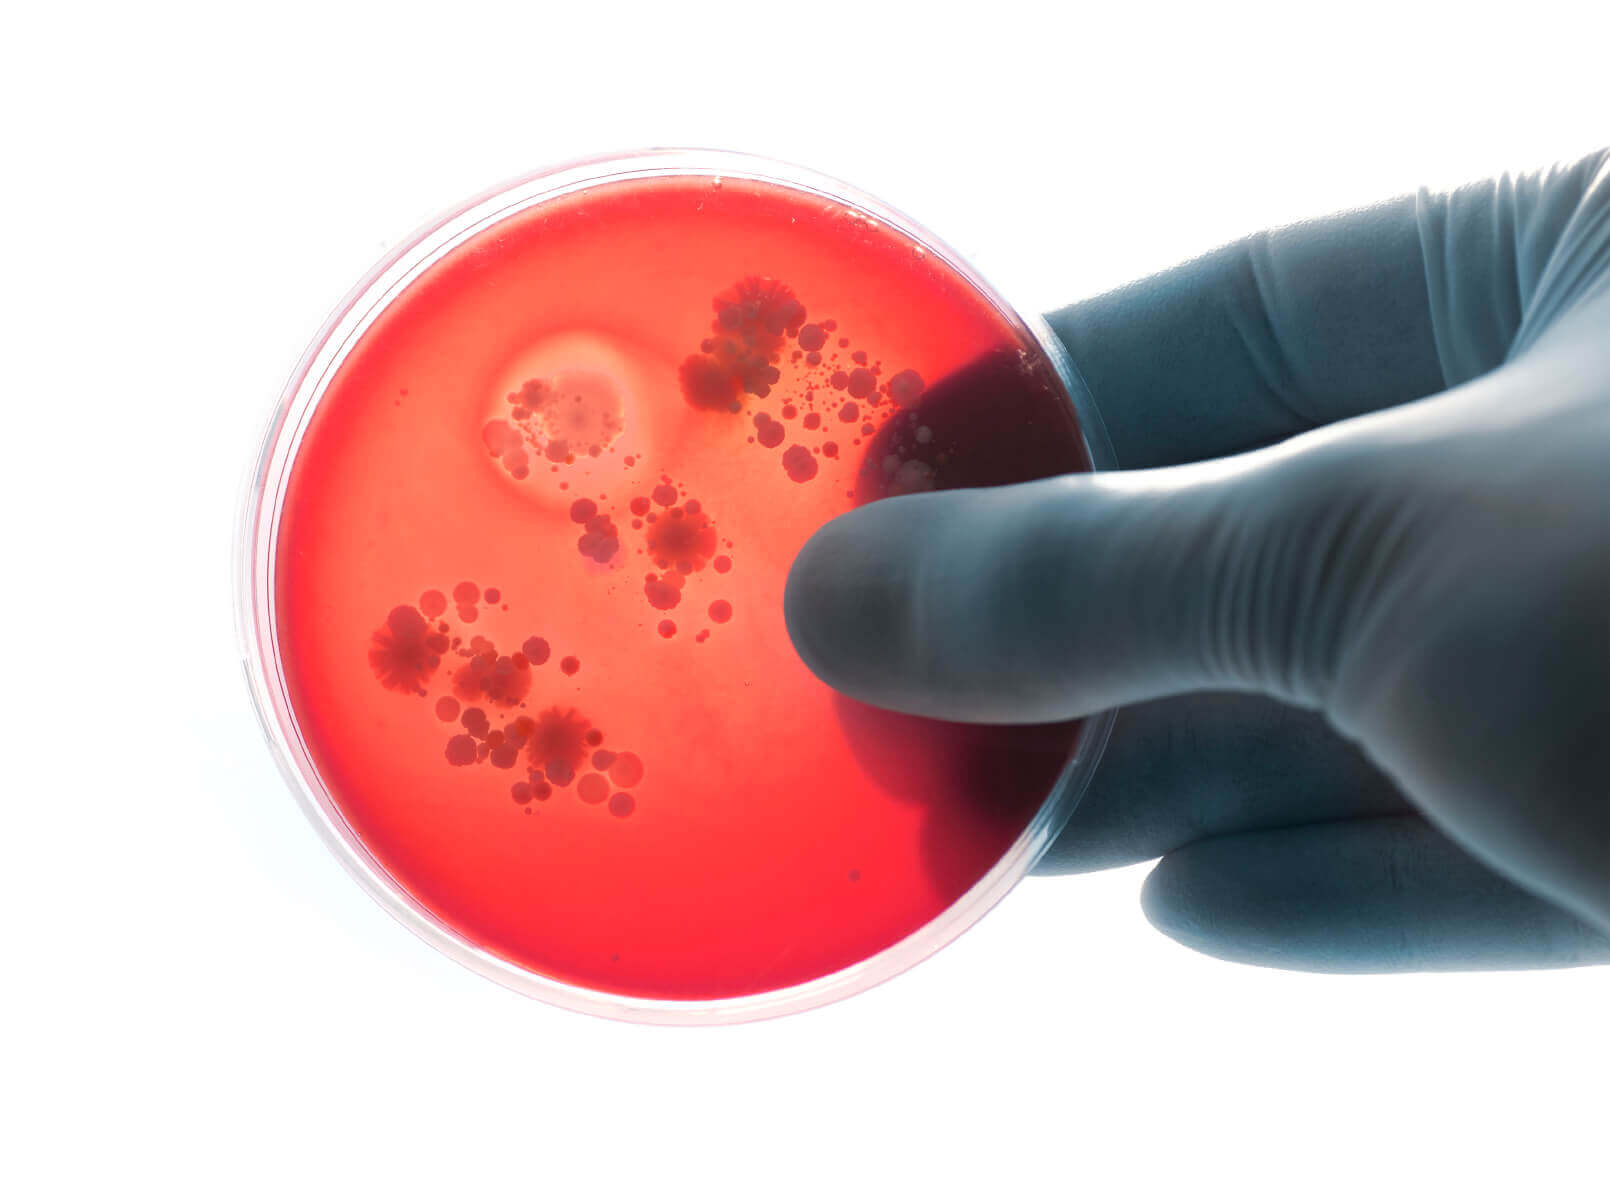 Gloved hands holding a bacteria plate